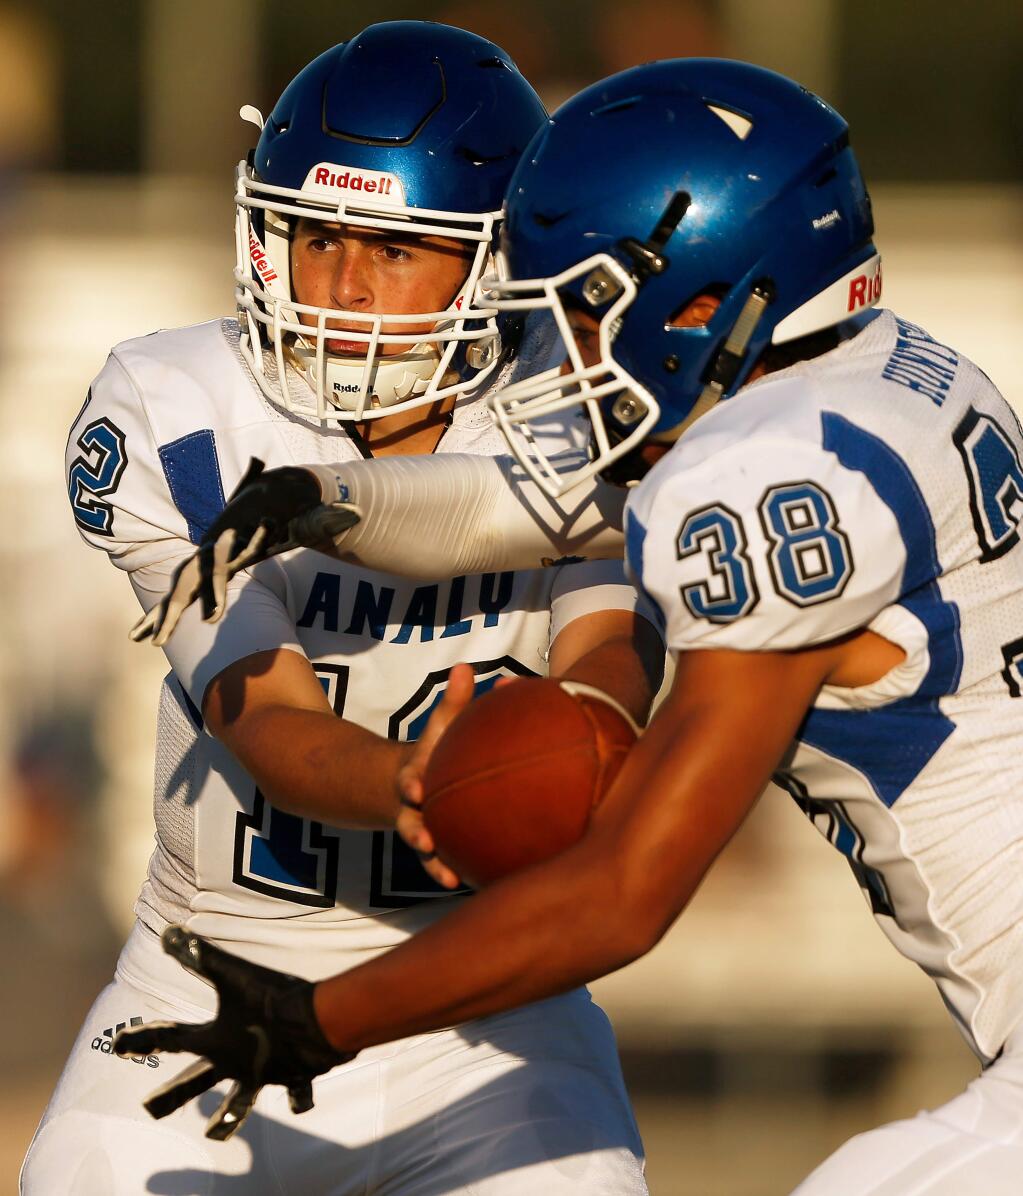 Analy quarterback Gavin Allingham, left, hands off the ball to running back Kole Hunter during the first half between Analy and Santa Rosa high schools in Santa Rosa on Friday, Aug. 23, 2019. (Alvin Jornada / The Press Democrat)